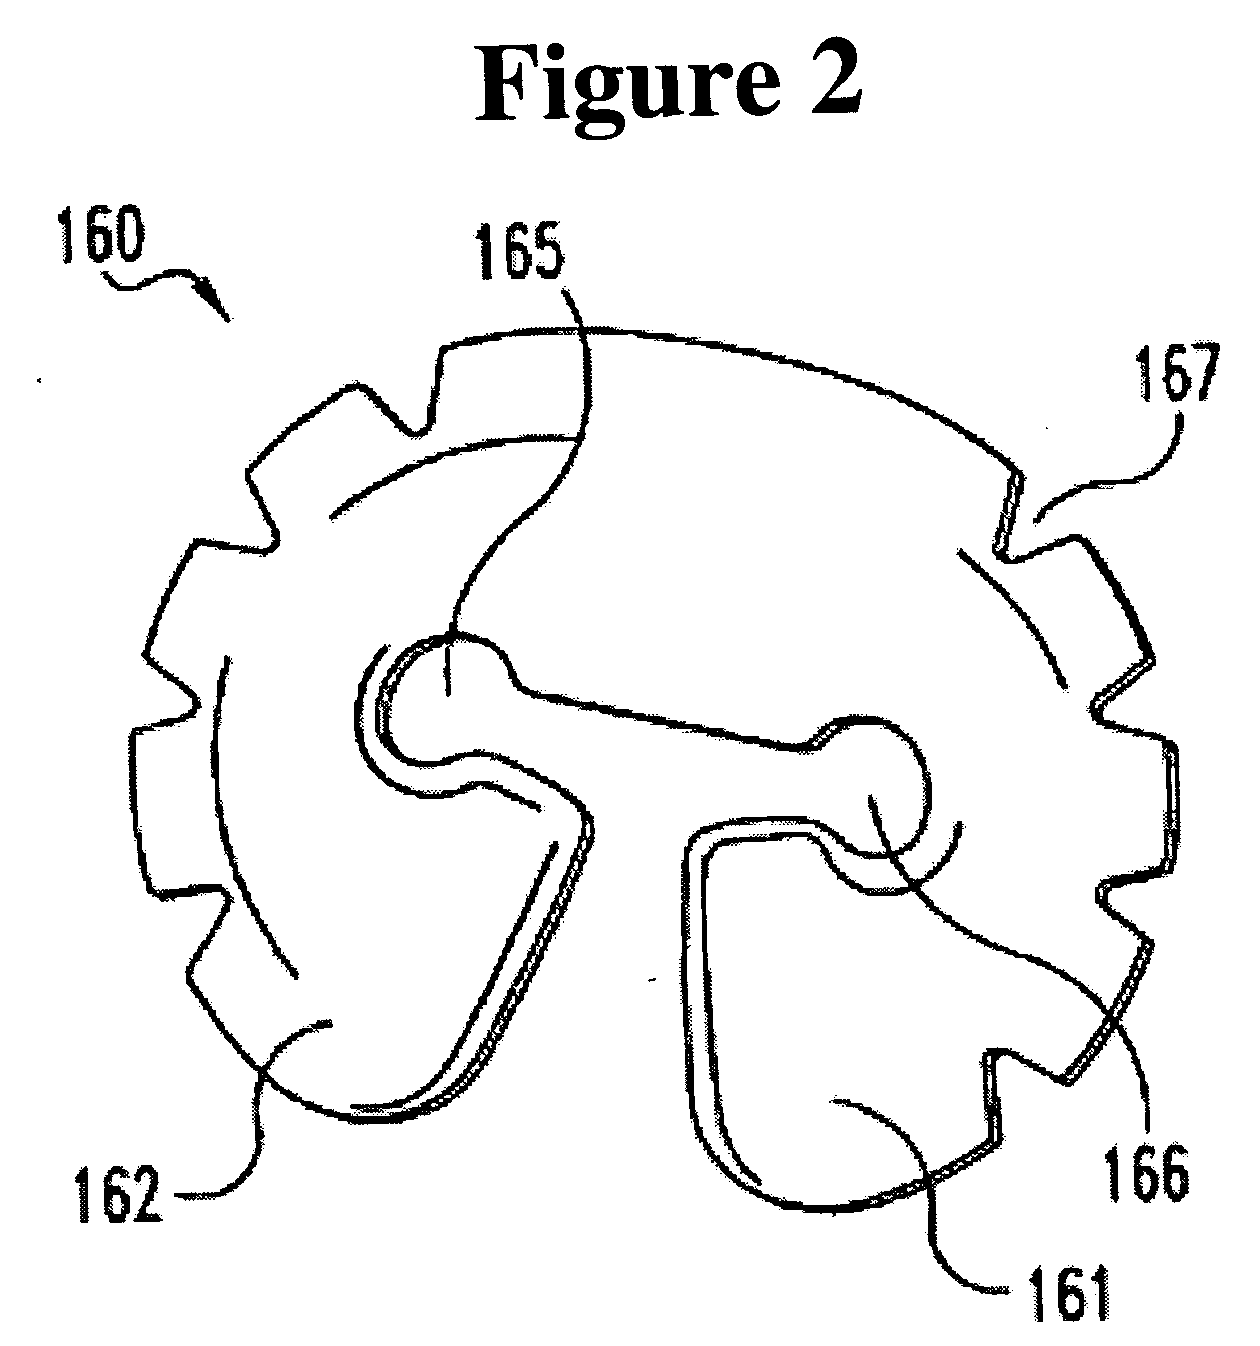 Composite spinal nucleus implant with water absorption and swelling capabilities